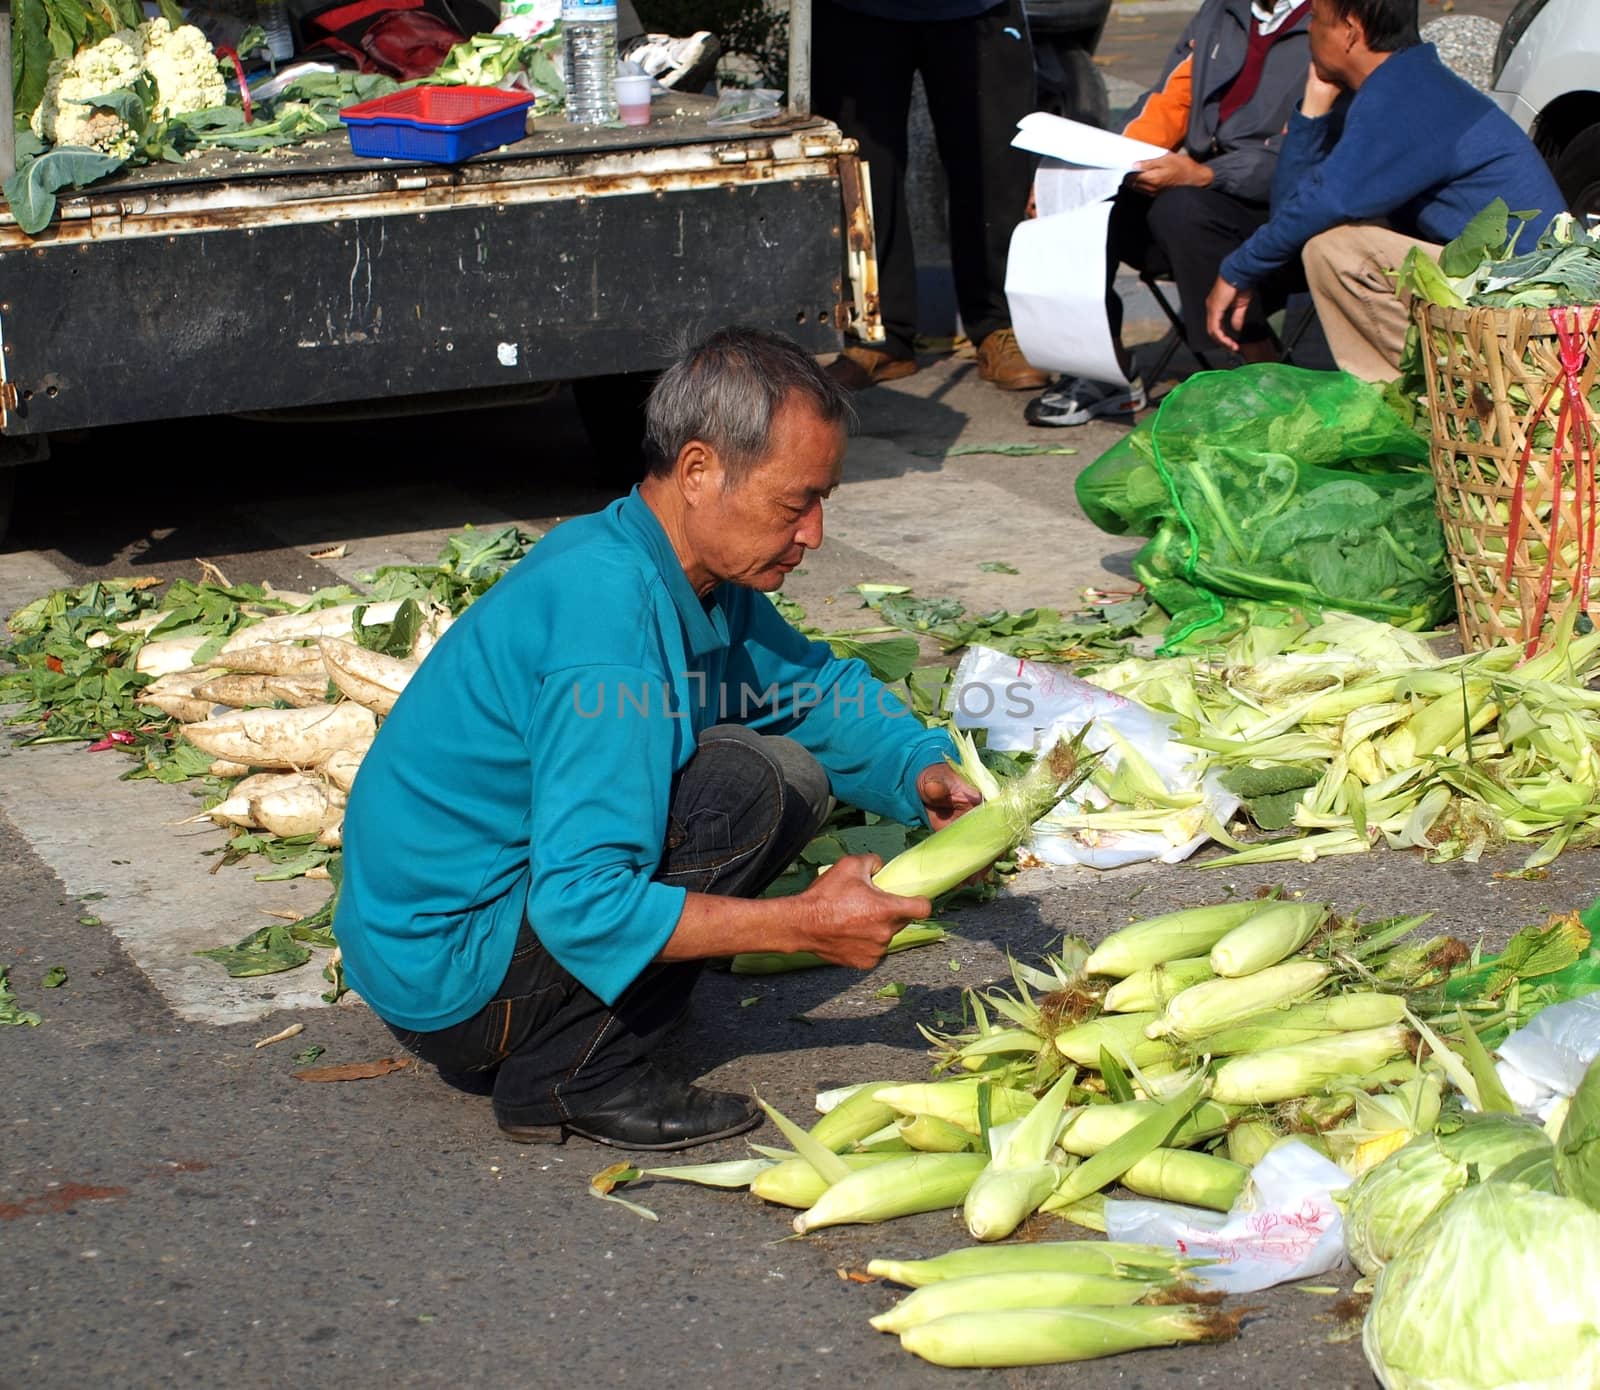 KAOHSIUNG, TAIWAN - FEBRUARY 9: An unidentified shopper removes the husks from corn at an outdoor market on February 9, 2013 in Kaohsiung.